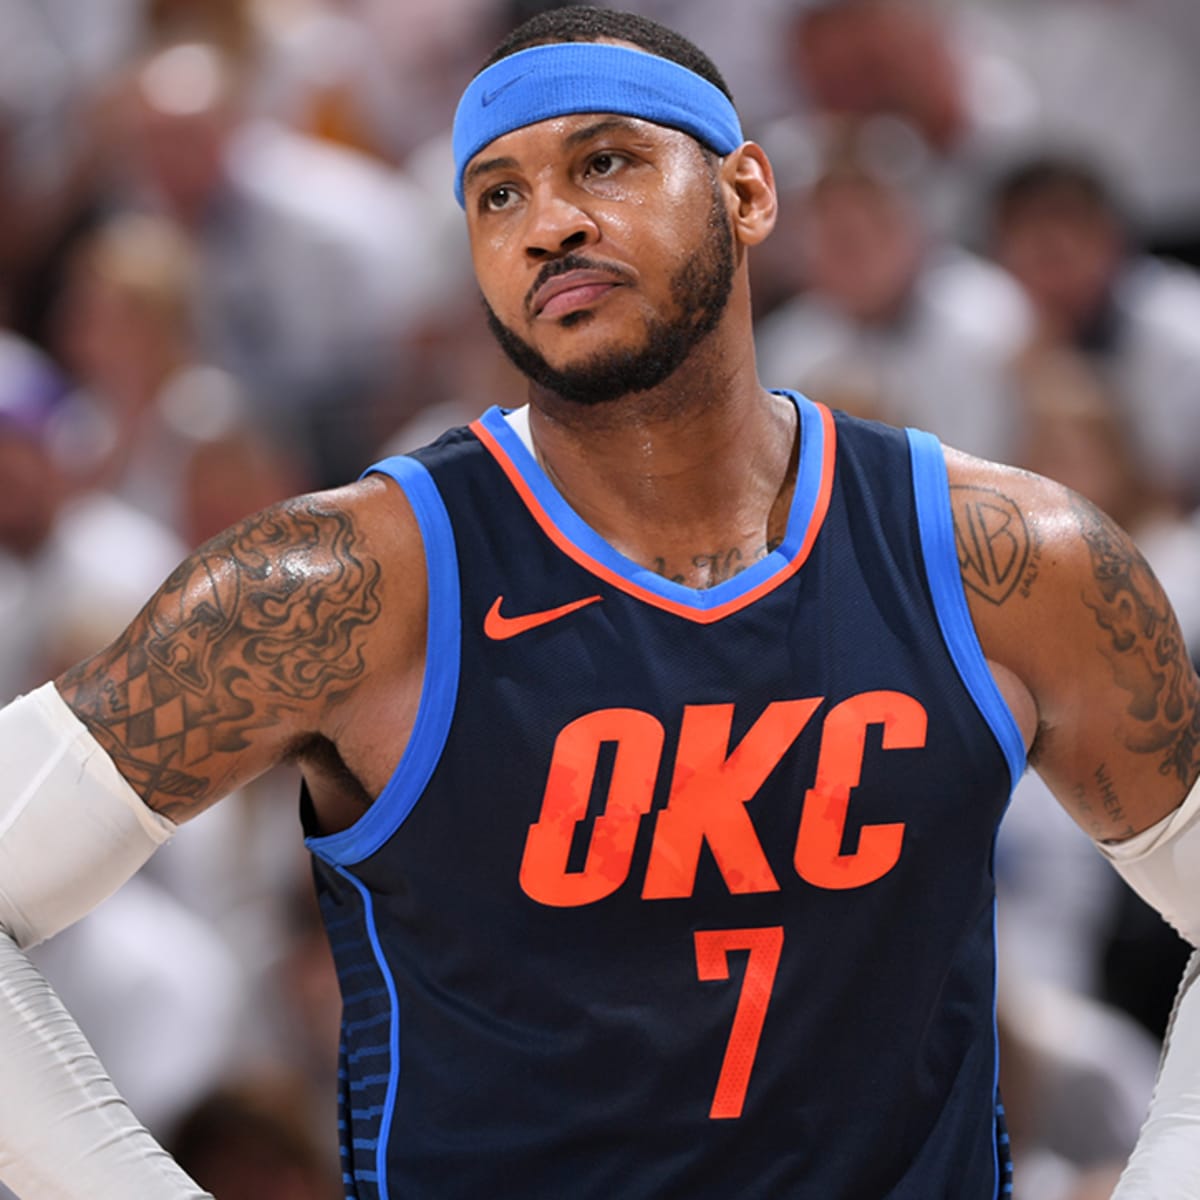 Remembering Carmelo Anthony's 3 best games for the Oklahoma City Thunder